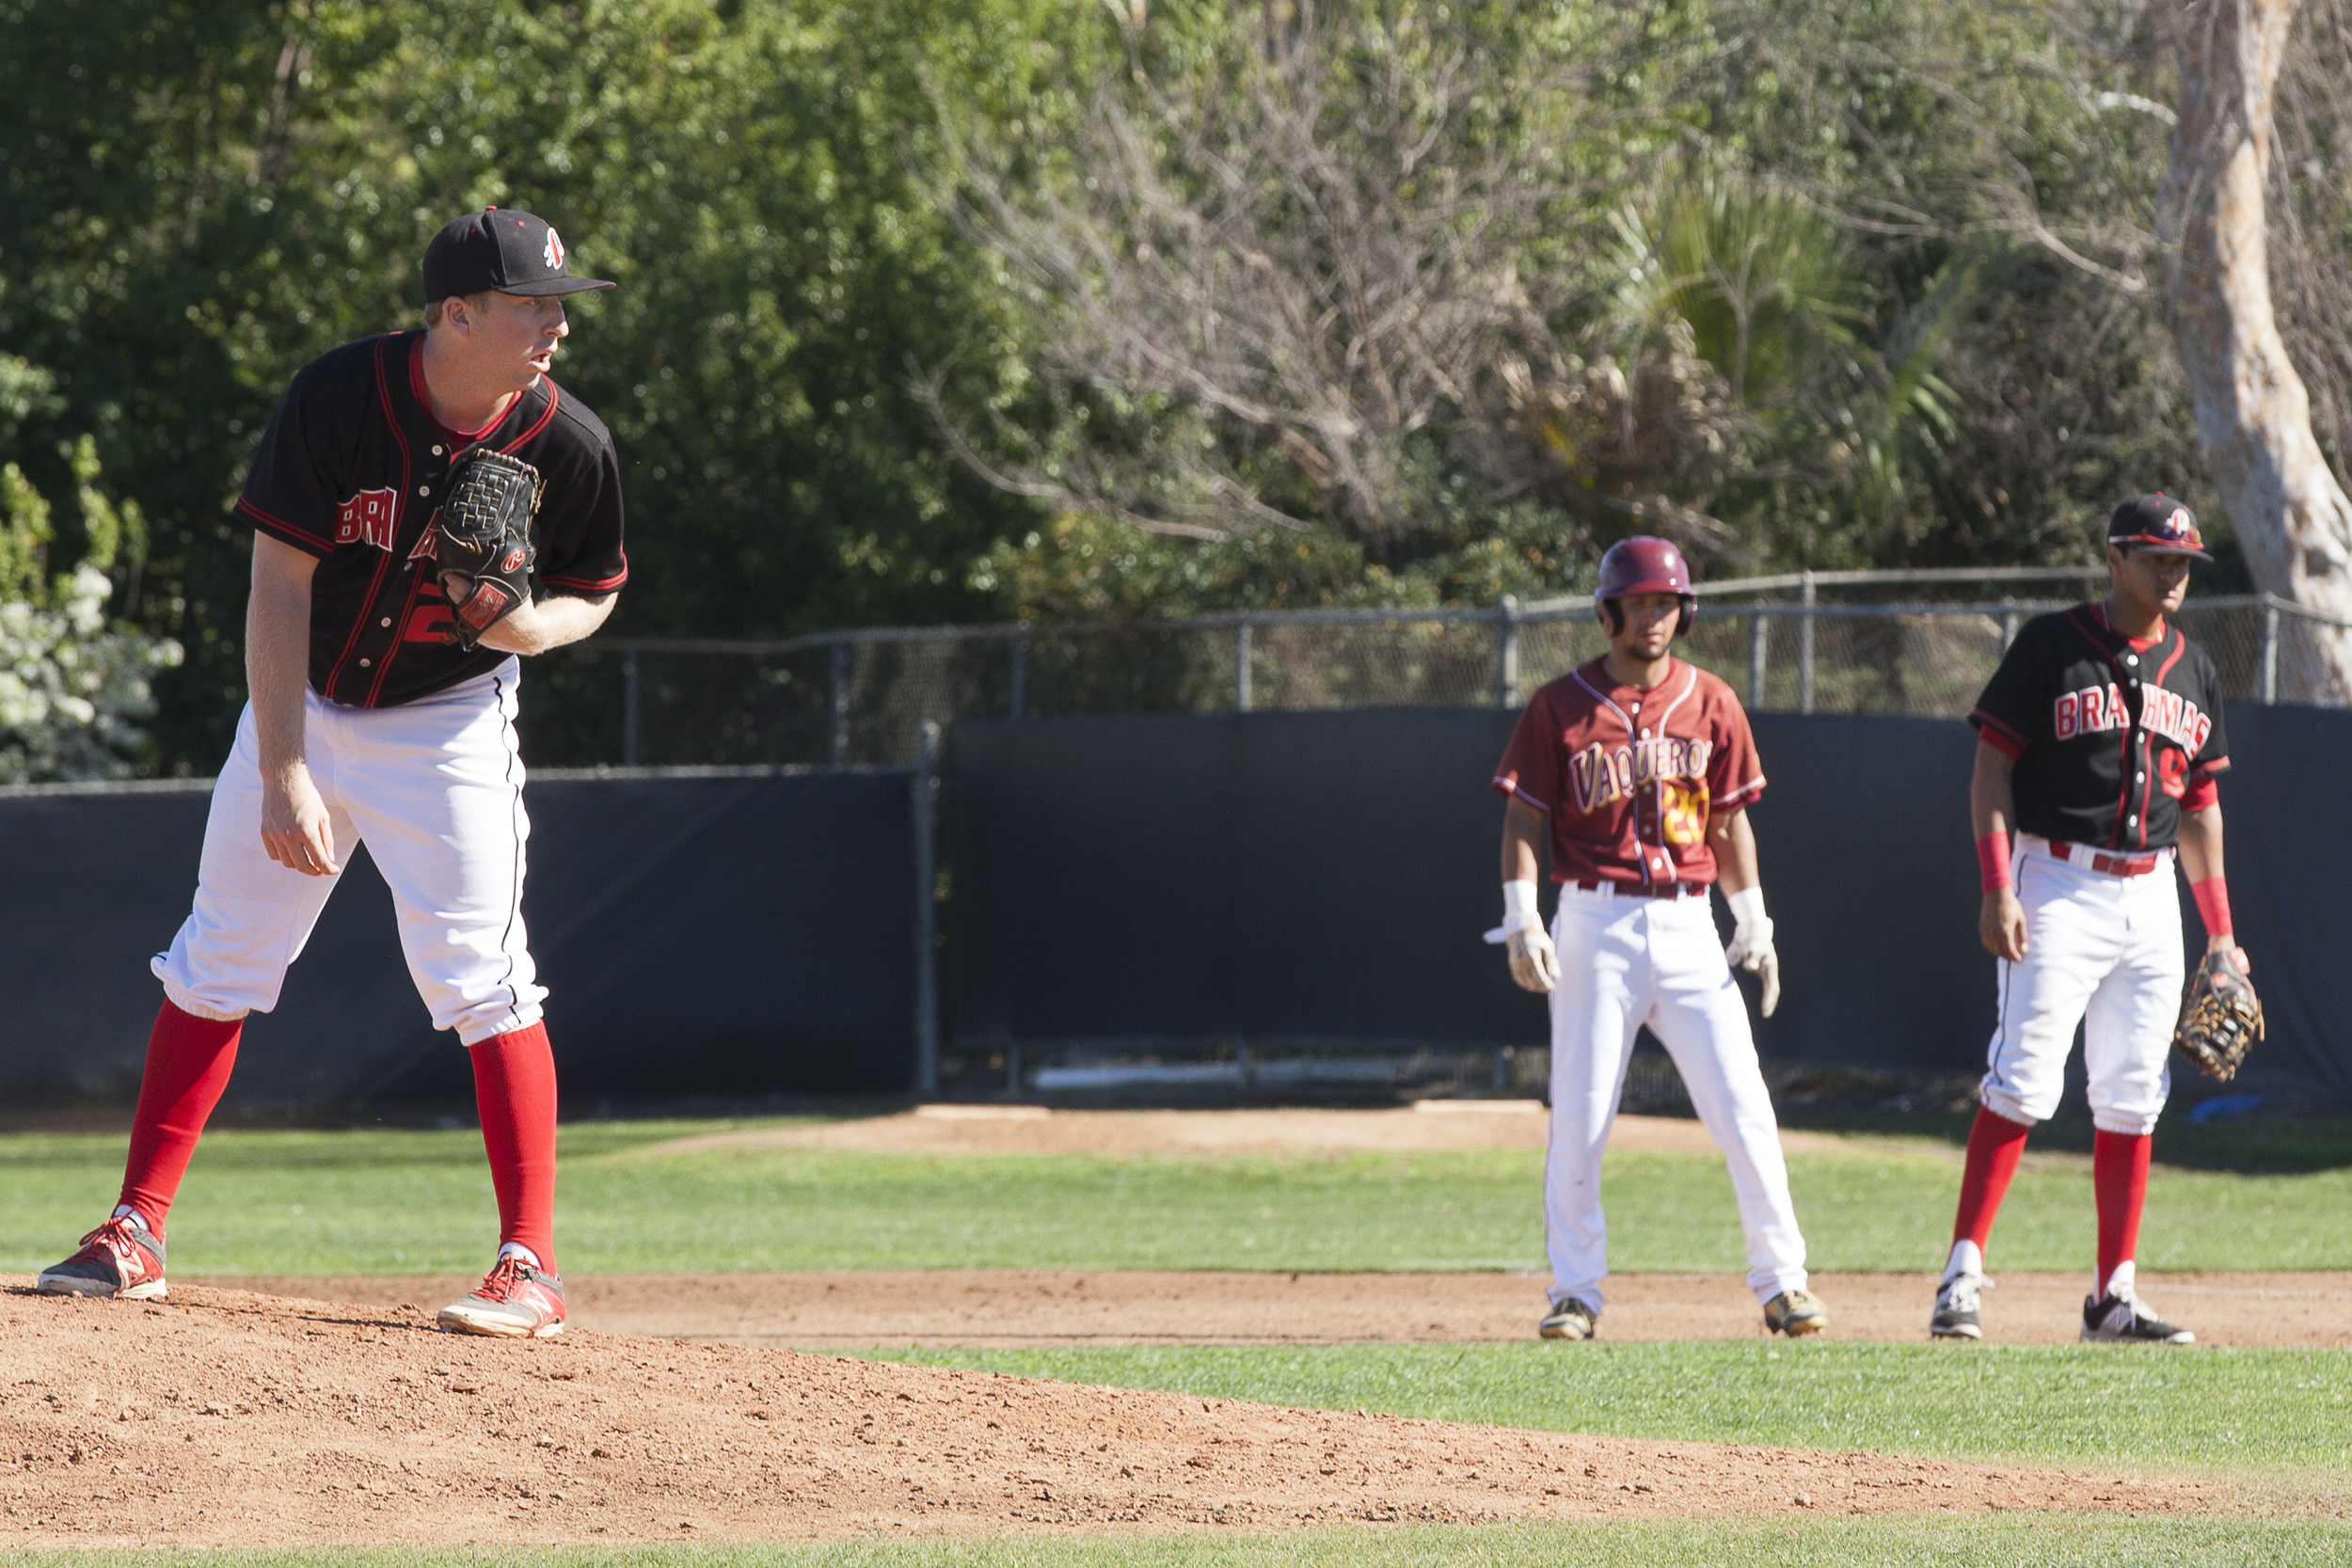  With a runner on 1st base, Brett Weisberg set his feet before throwing a pitch during a home game in Woodland Hills, Calif., against Glendale College on Saturday, Feb. 13, 2016. Glendale would win the game with a score of 15-6.&nbsp; 